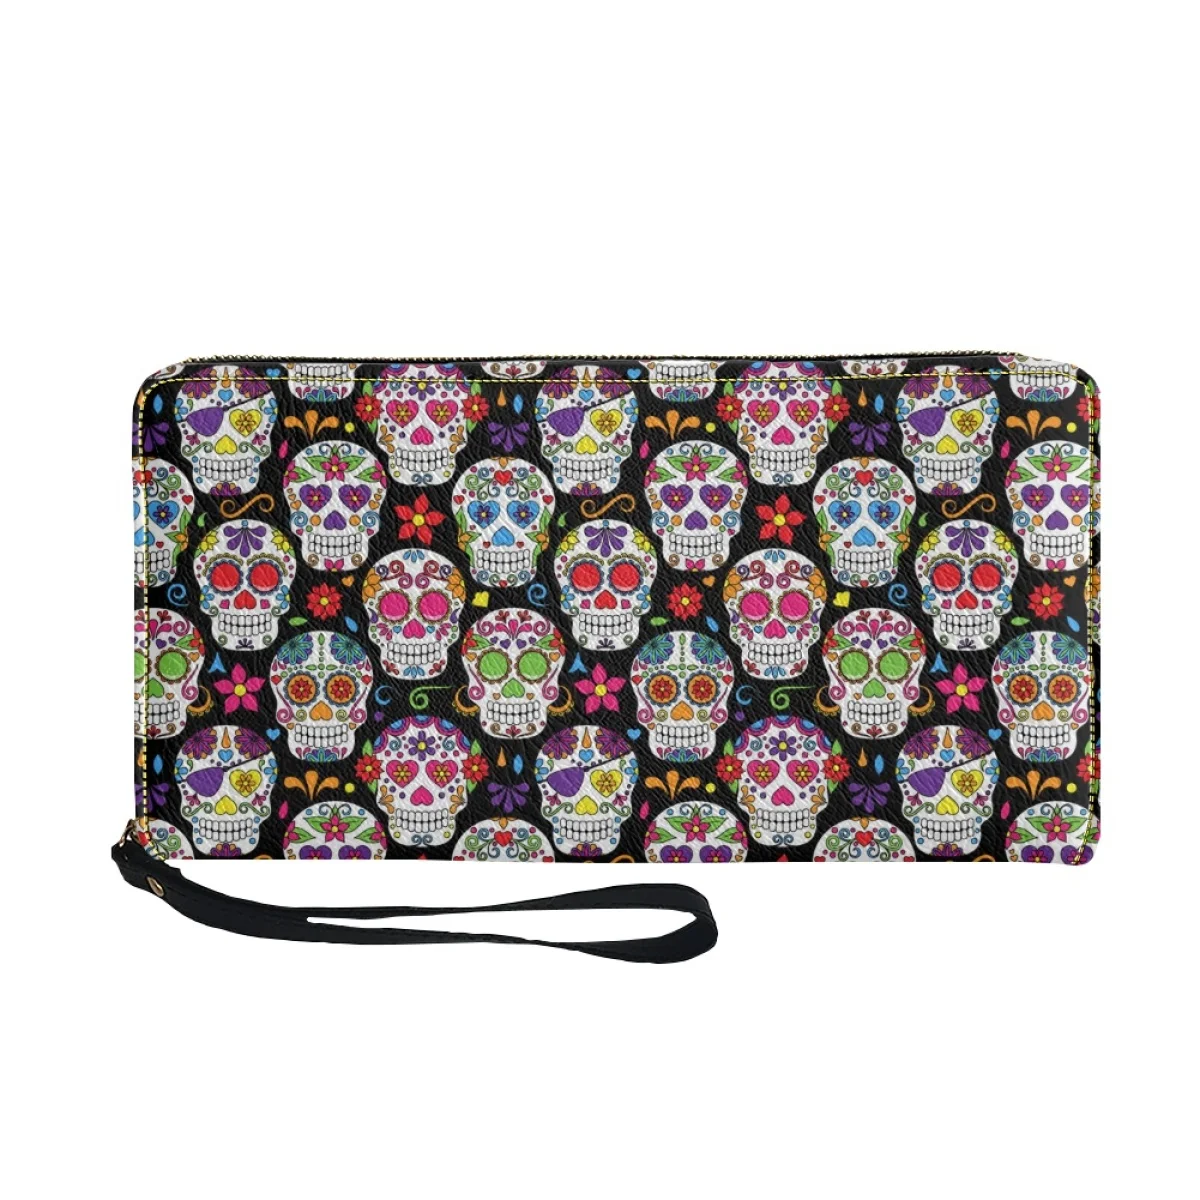 Skull Print Purses for Women Luxury Brand Wallet PU Leather Lightweight With Strap Clutch Wallet Carteras Para Mujer